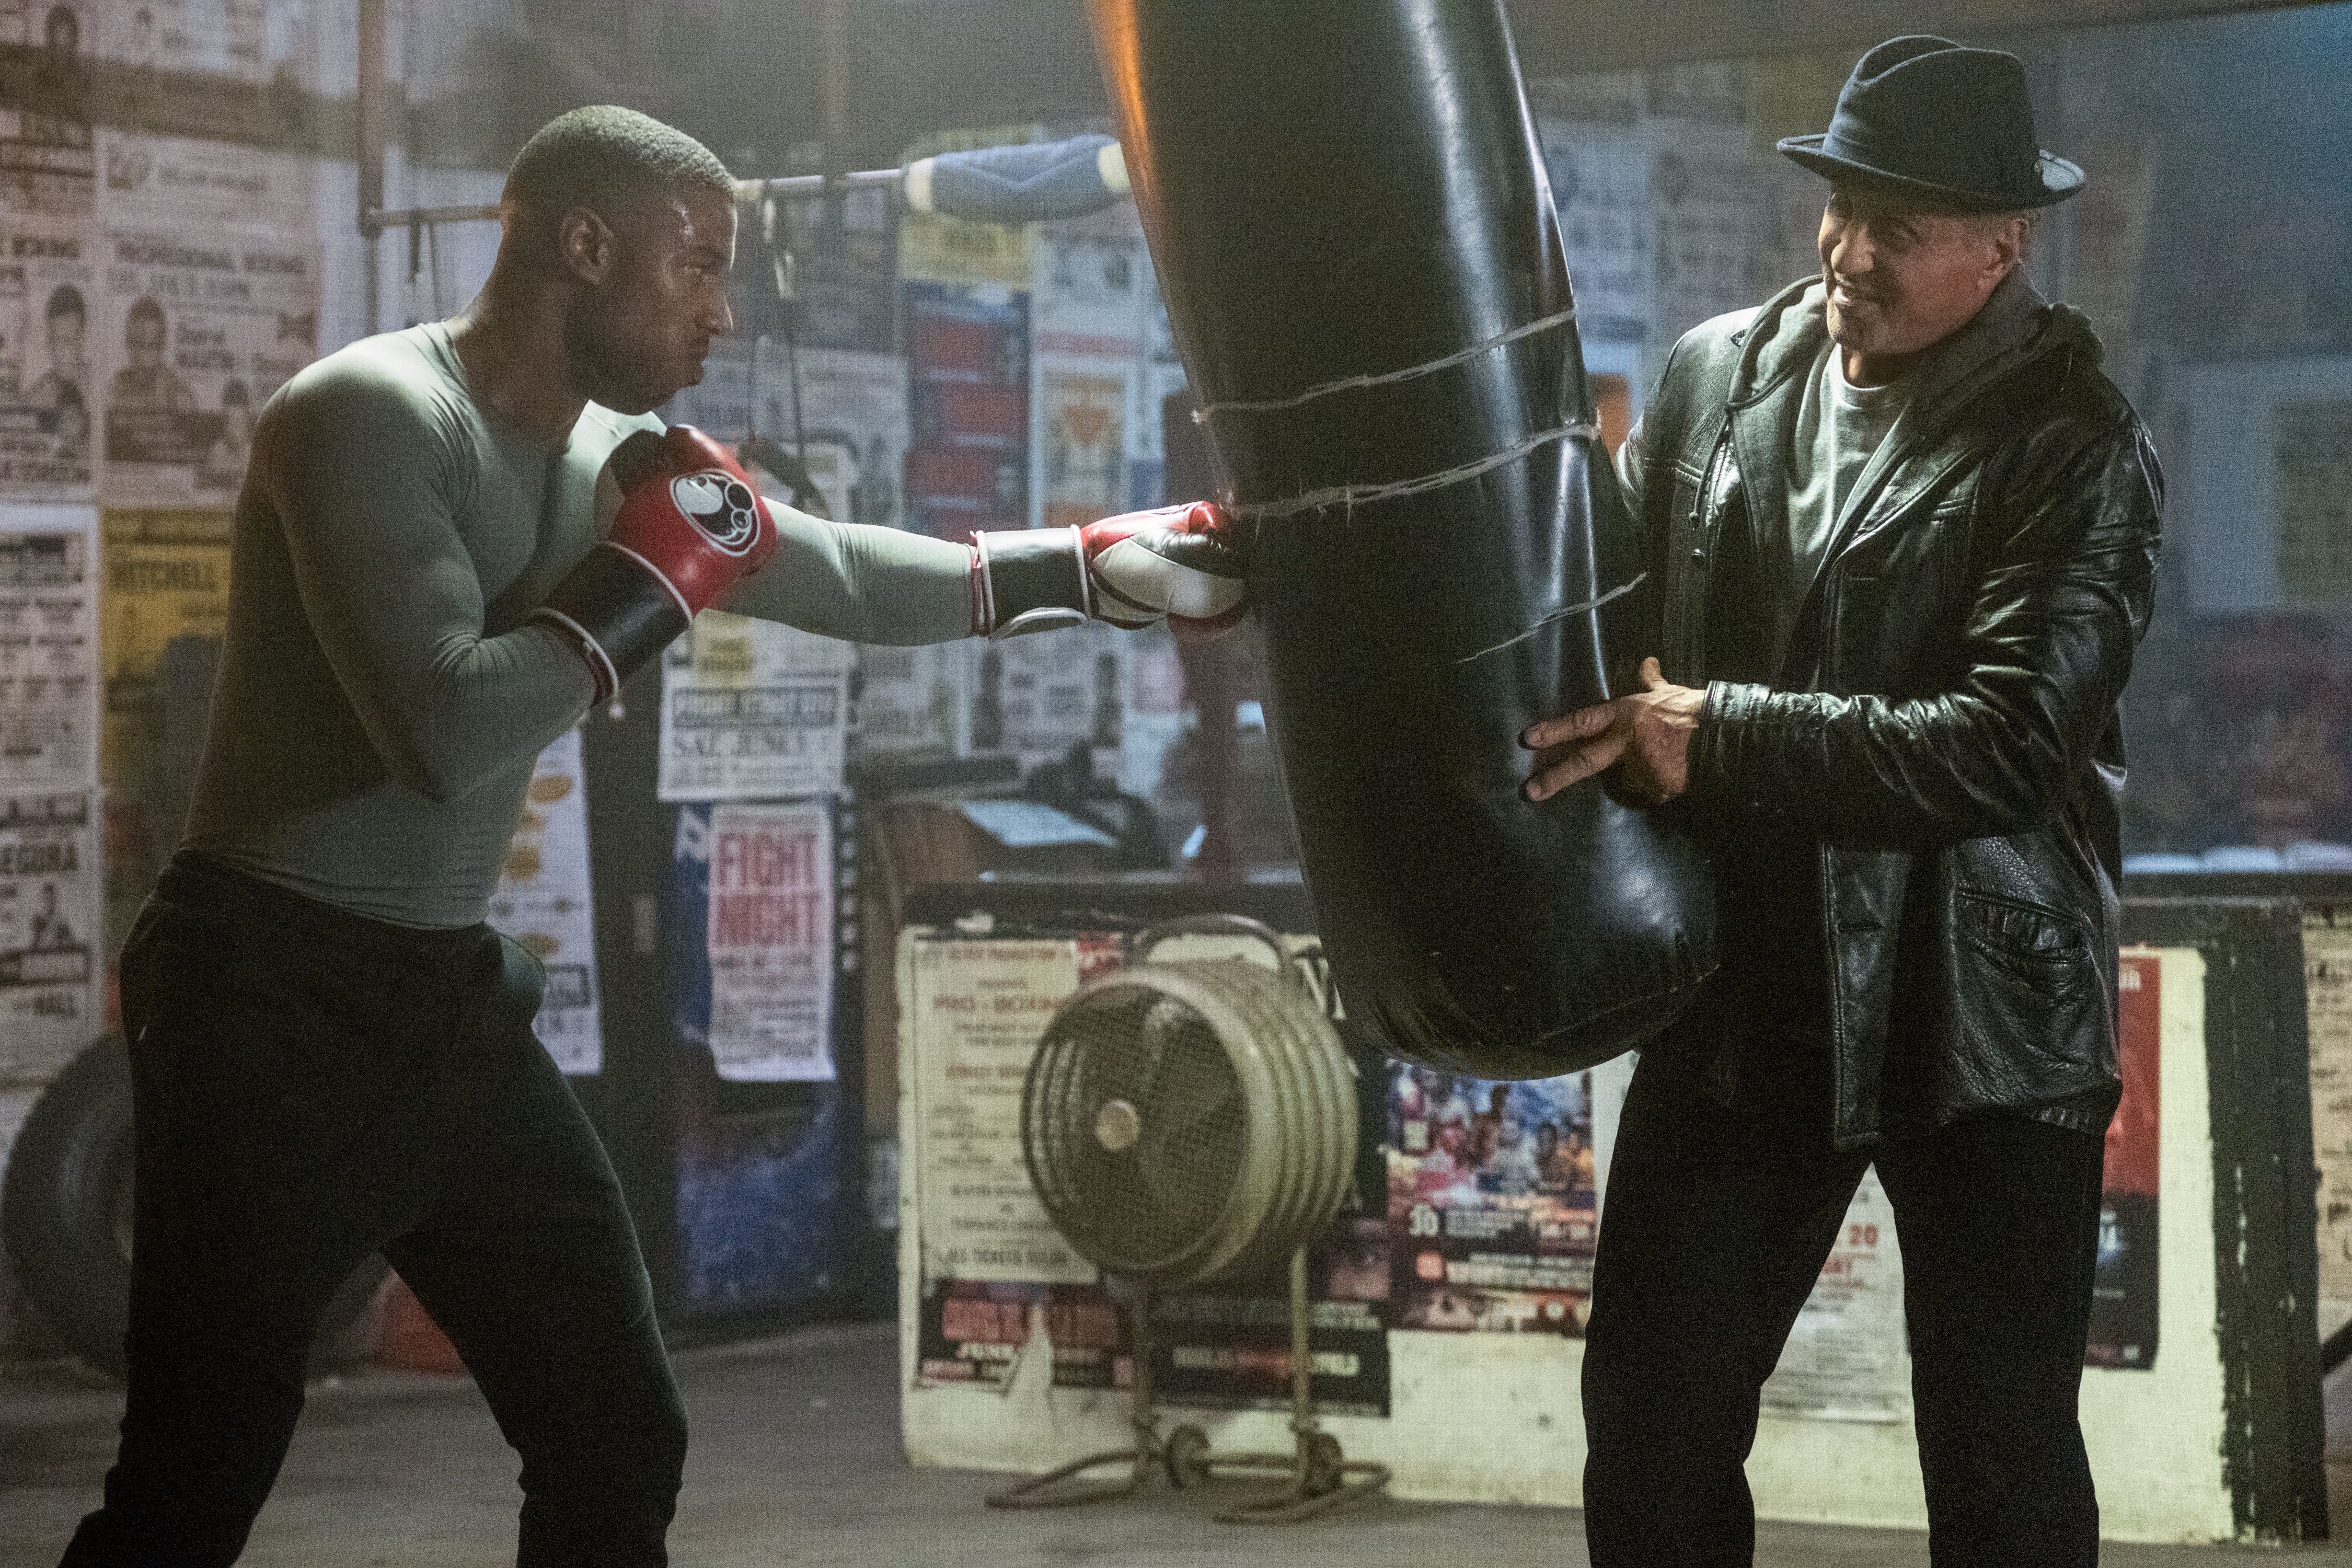 Michael B. Jordan Returns to the Ring In New Creed 2 Photos